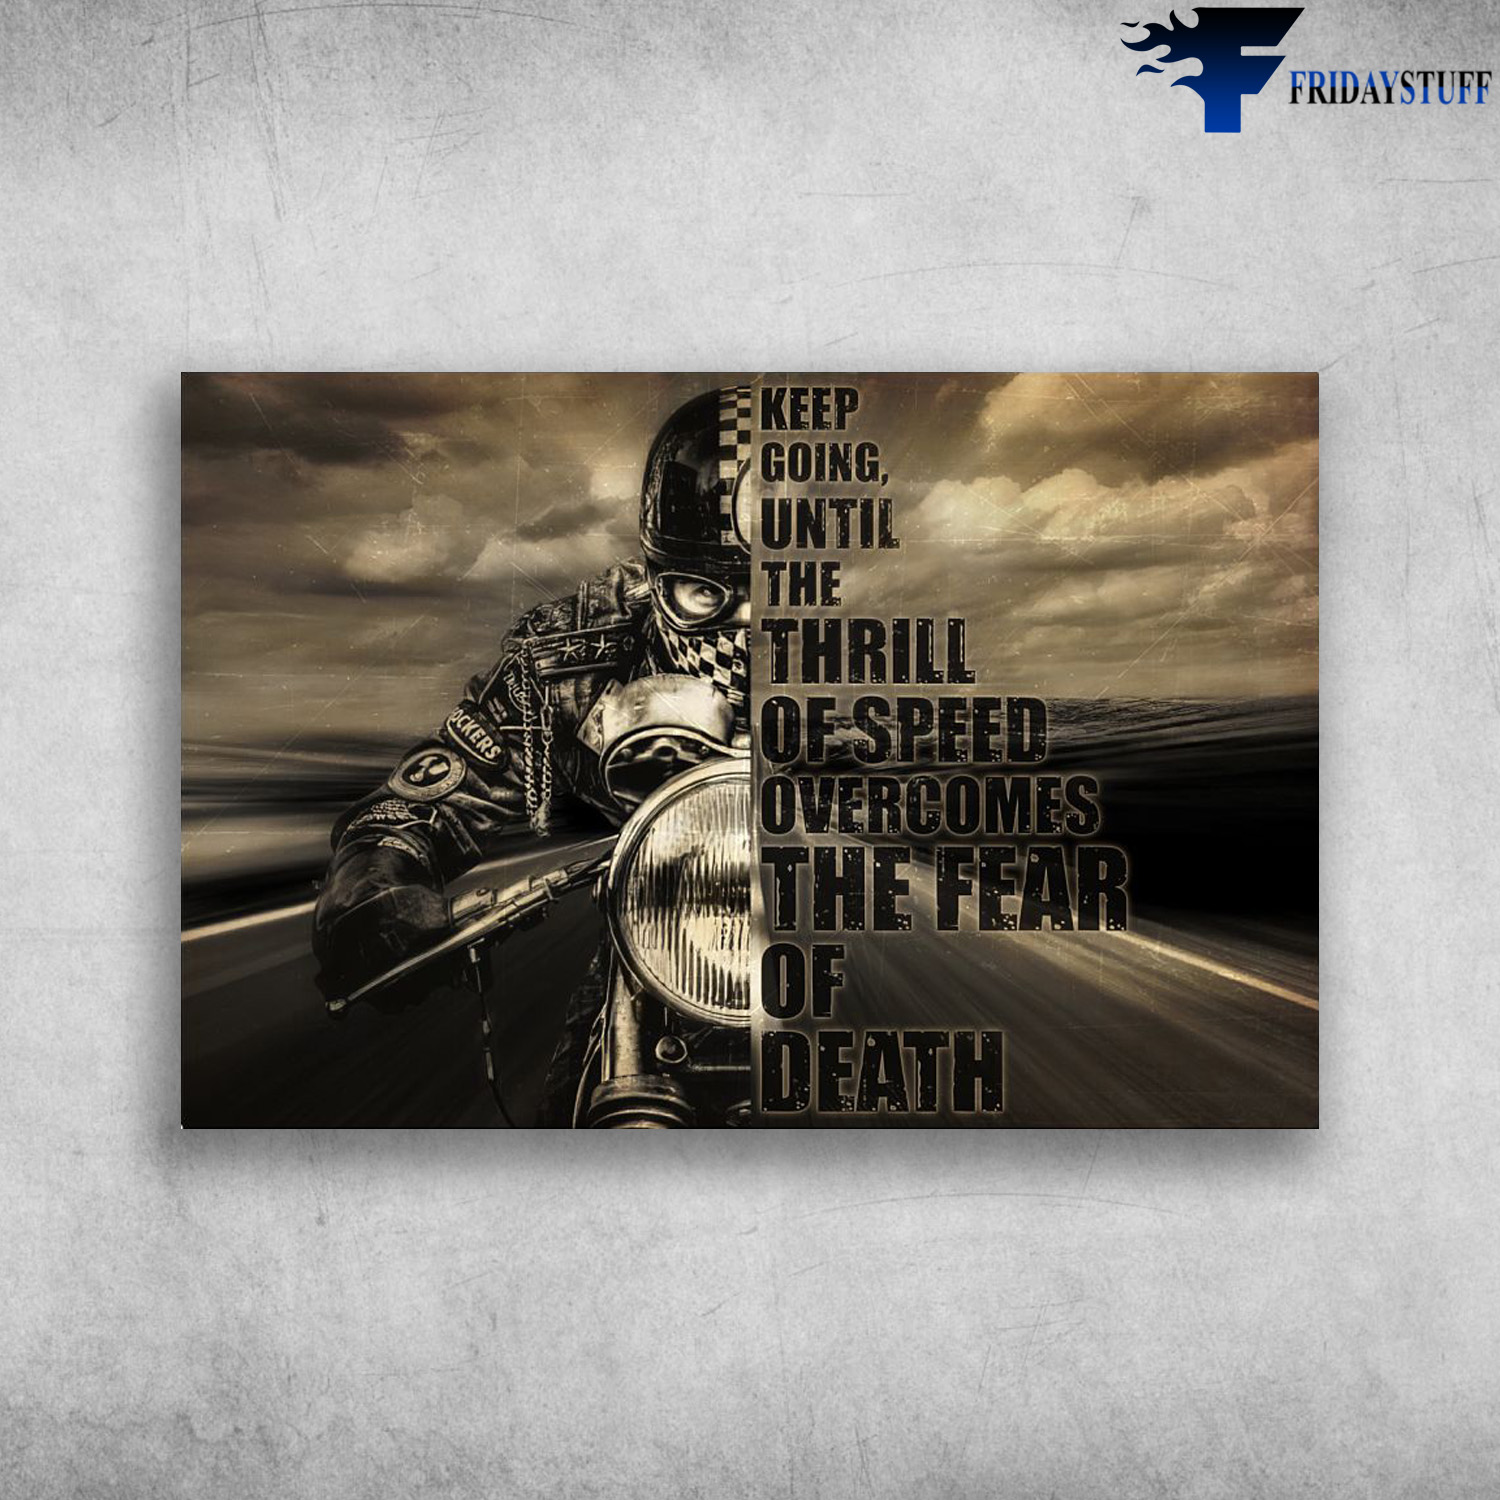 Motorcycle Man - Keep Going, Until The Thrill Of Speed Overcomes, The Fear Of Death